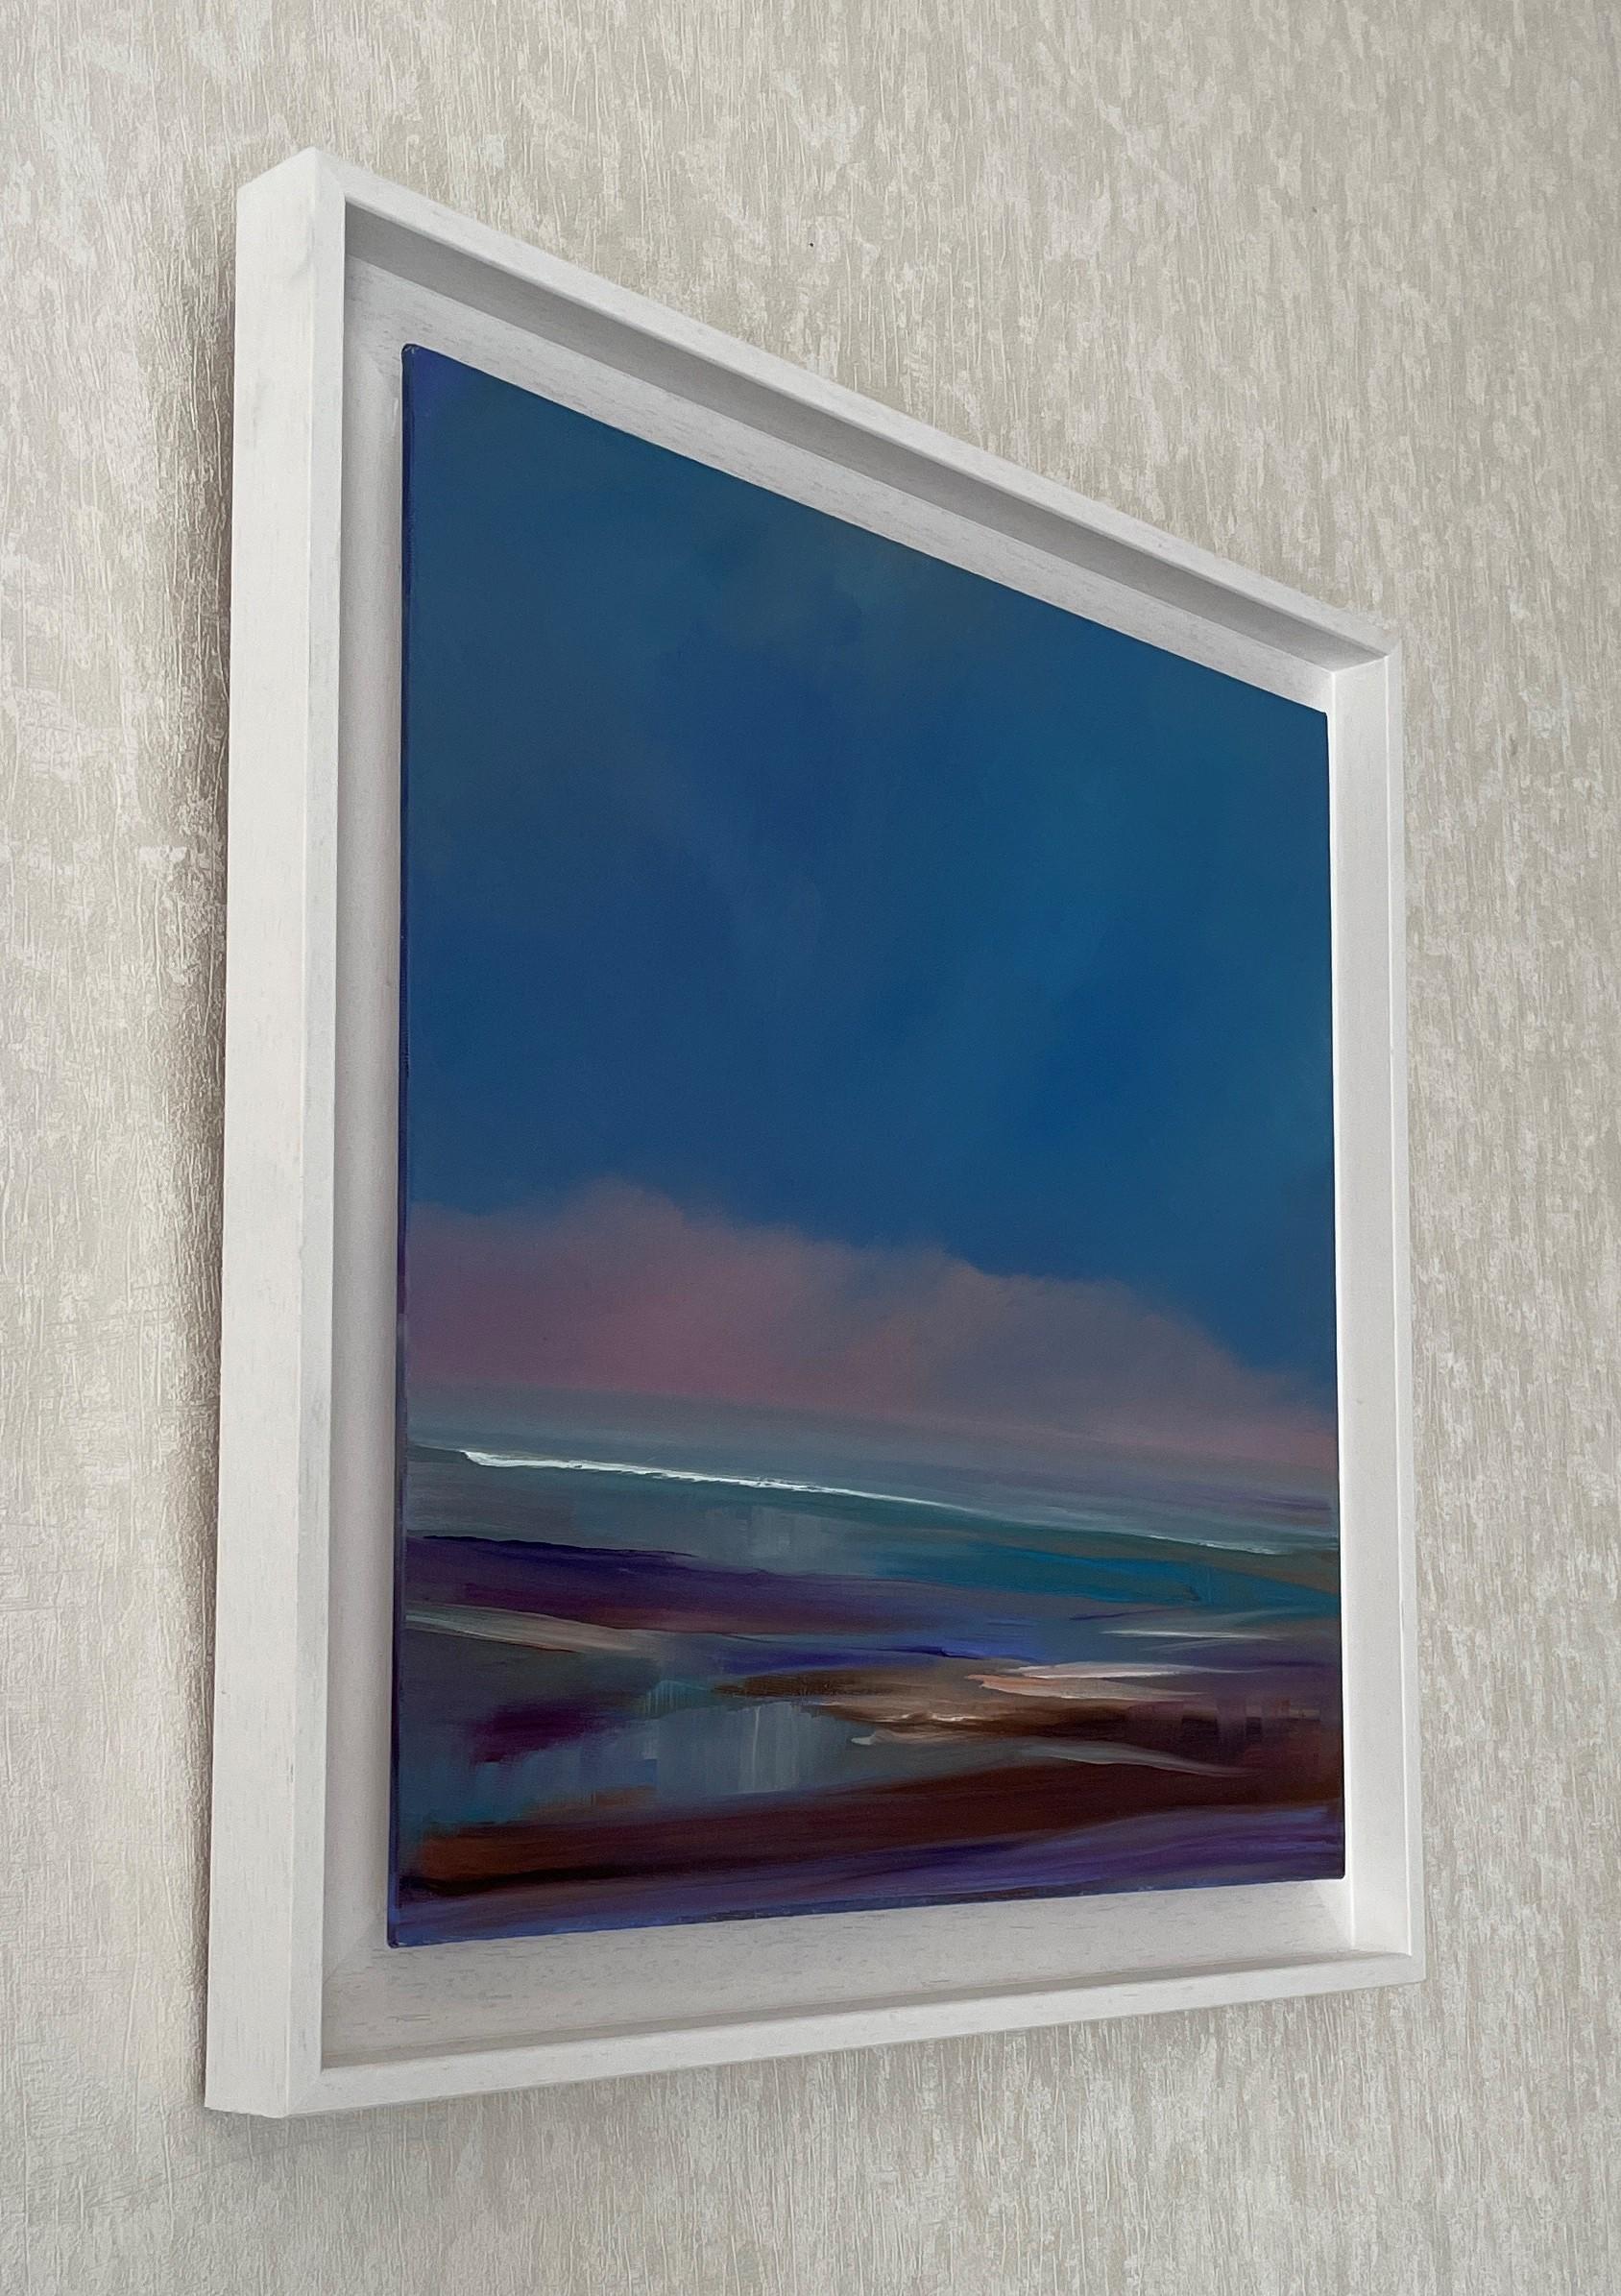 The Wave By Helen Robinson [2020]

The Wave is one of a series of contemporary abstracted seascapes exploring the way light interacts with sky, earth and water. This work suggests the way light reflects on the ever-changing tidal channels which make